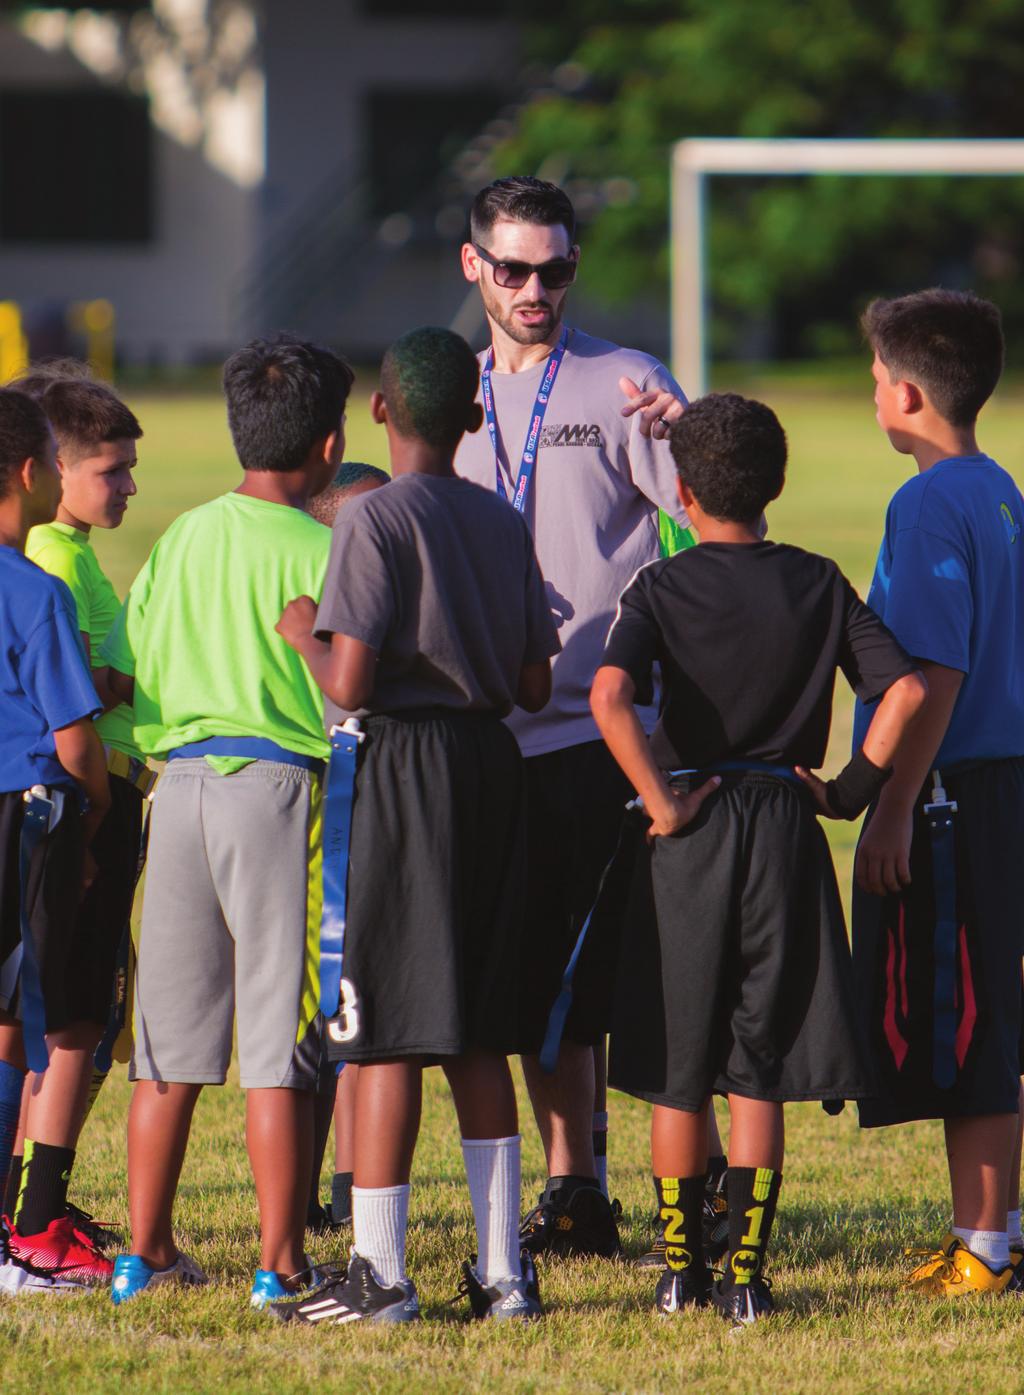 YOUTH SPORTS COACHES NEEDED BECOME A VOLUNTEER COACH AND MAKE A DIFFERENCE IN OUR YOUTH!